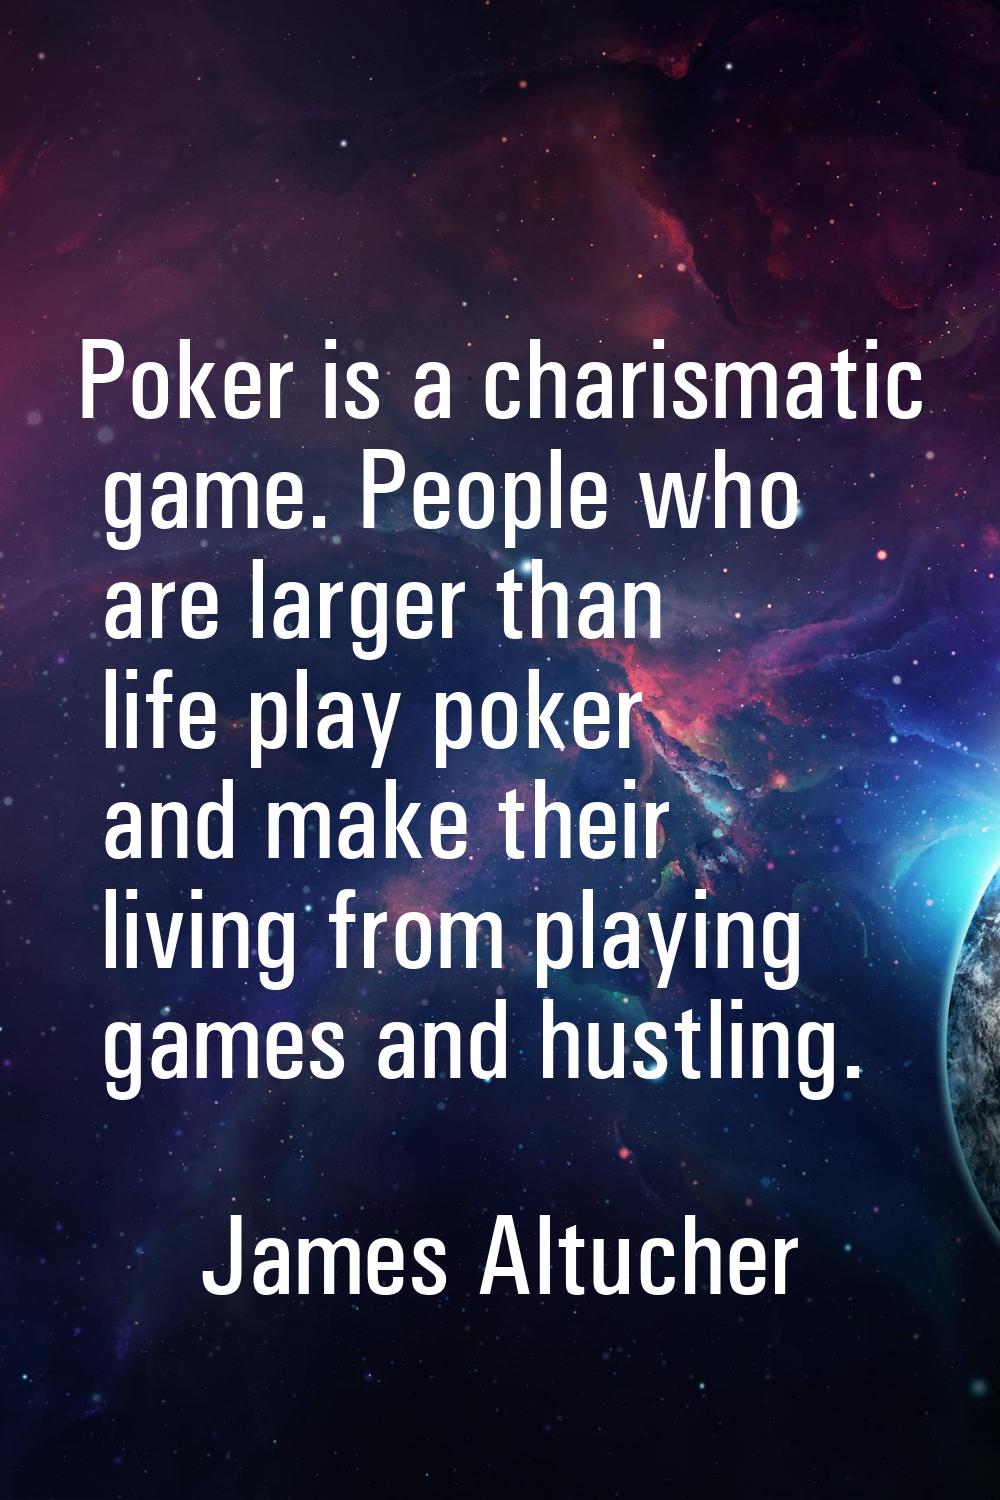 Poker is a charismatic game. People who are larger than life play poker and make their living from 